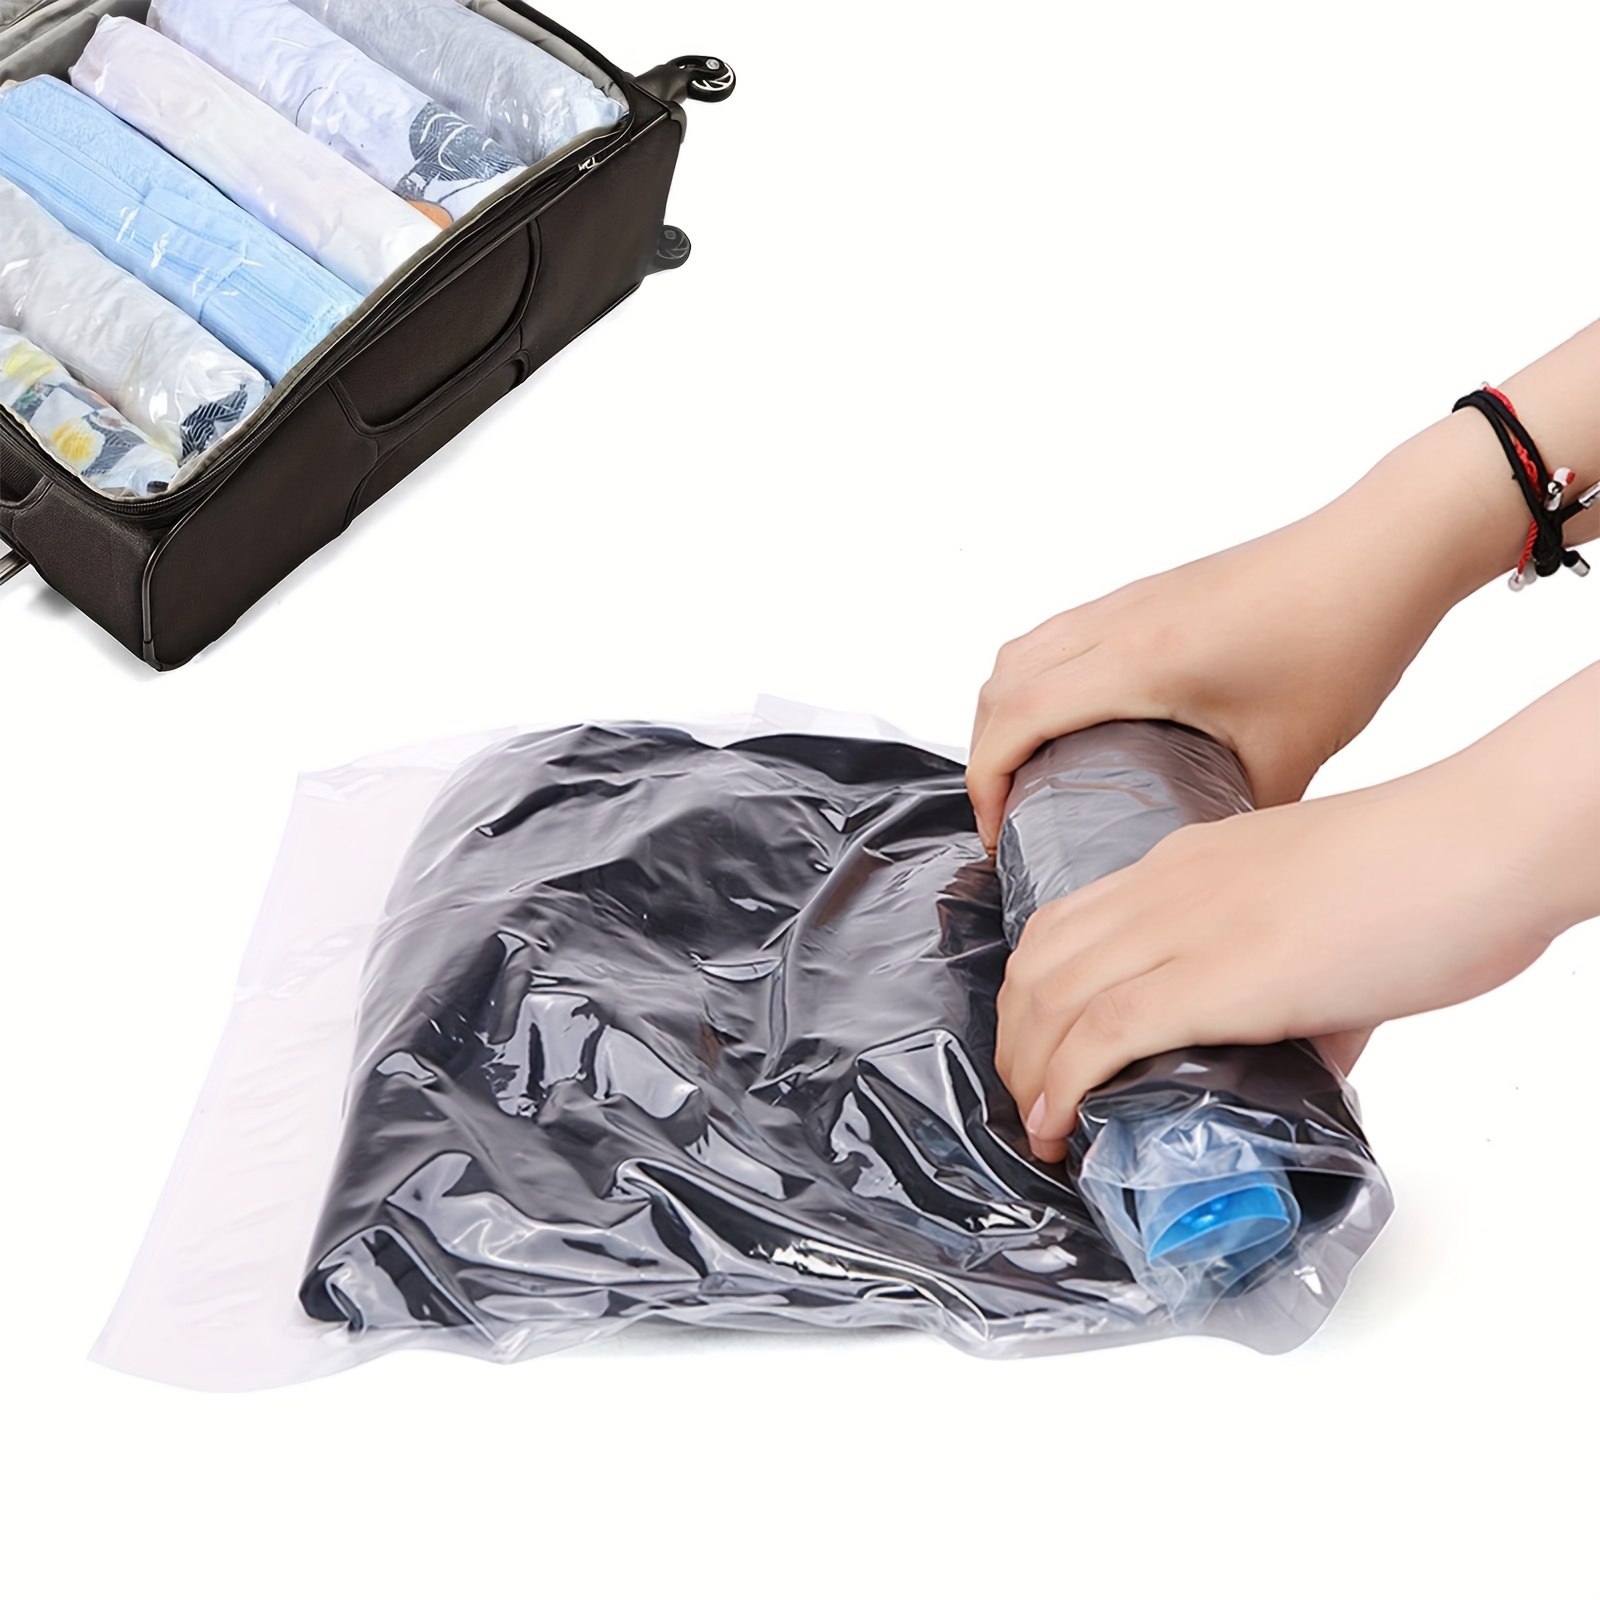 Large-size 40*60cm Hand-rolling Vacuum Compression Bag Compression Packing  Cubes Vacuum Bag Storage Bag Clothes Storage Clothes Organizer Travel Bag  Set For Travel College Dorm School Vacation Holiday Suitcase Luggage Back  to School